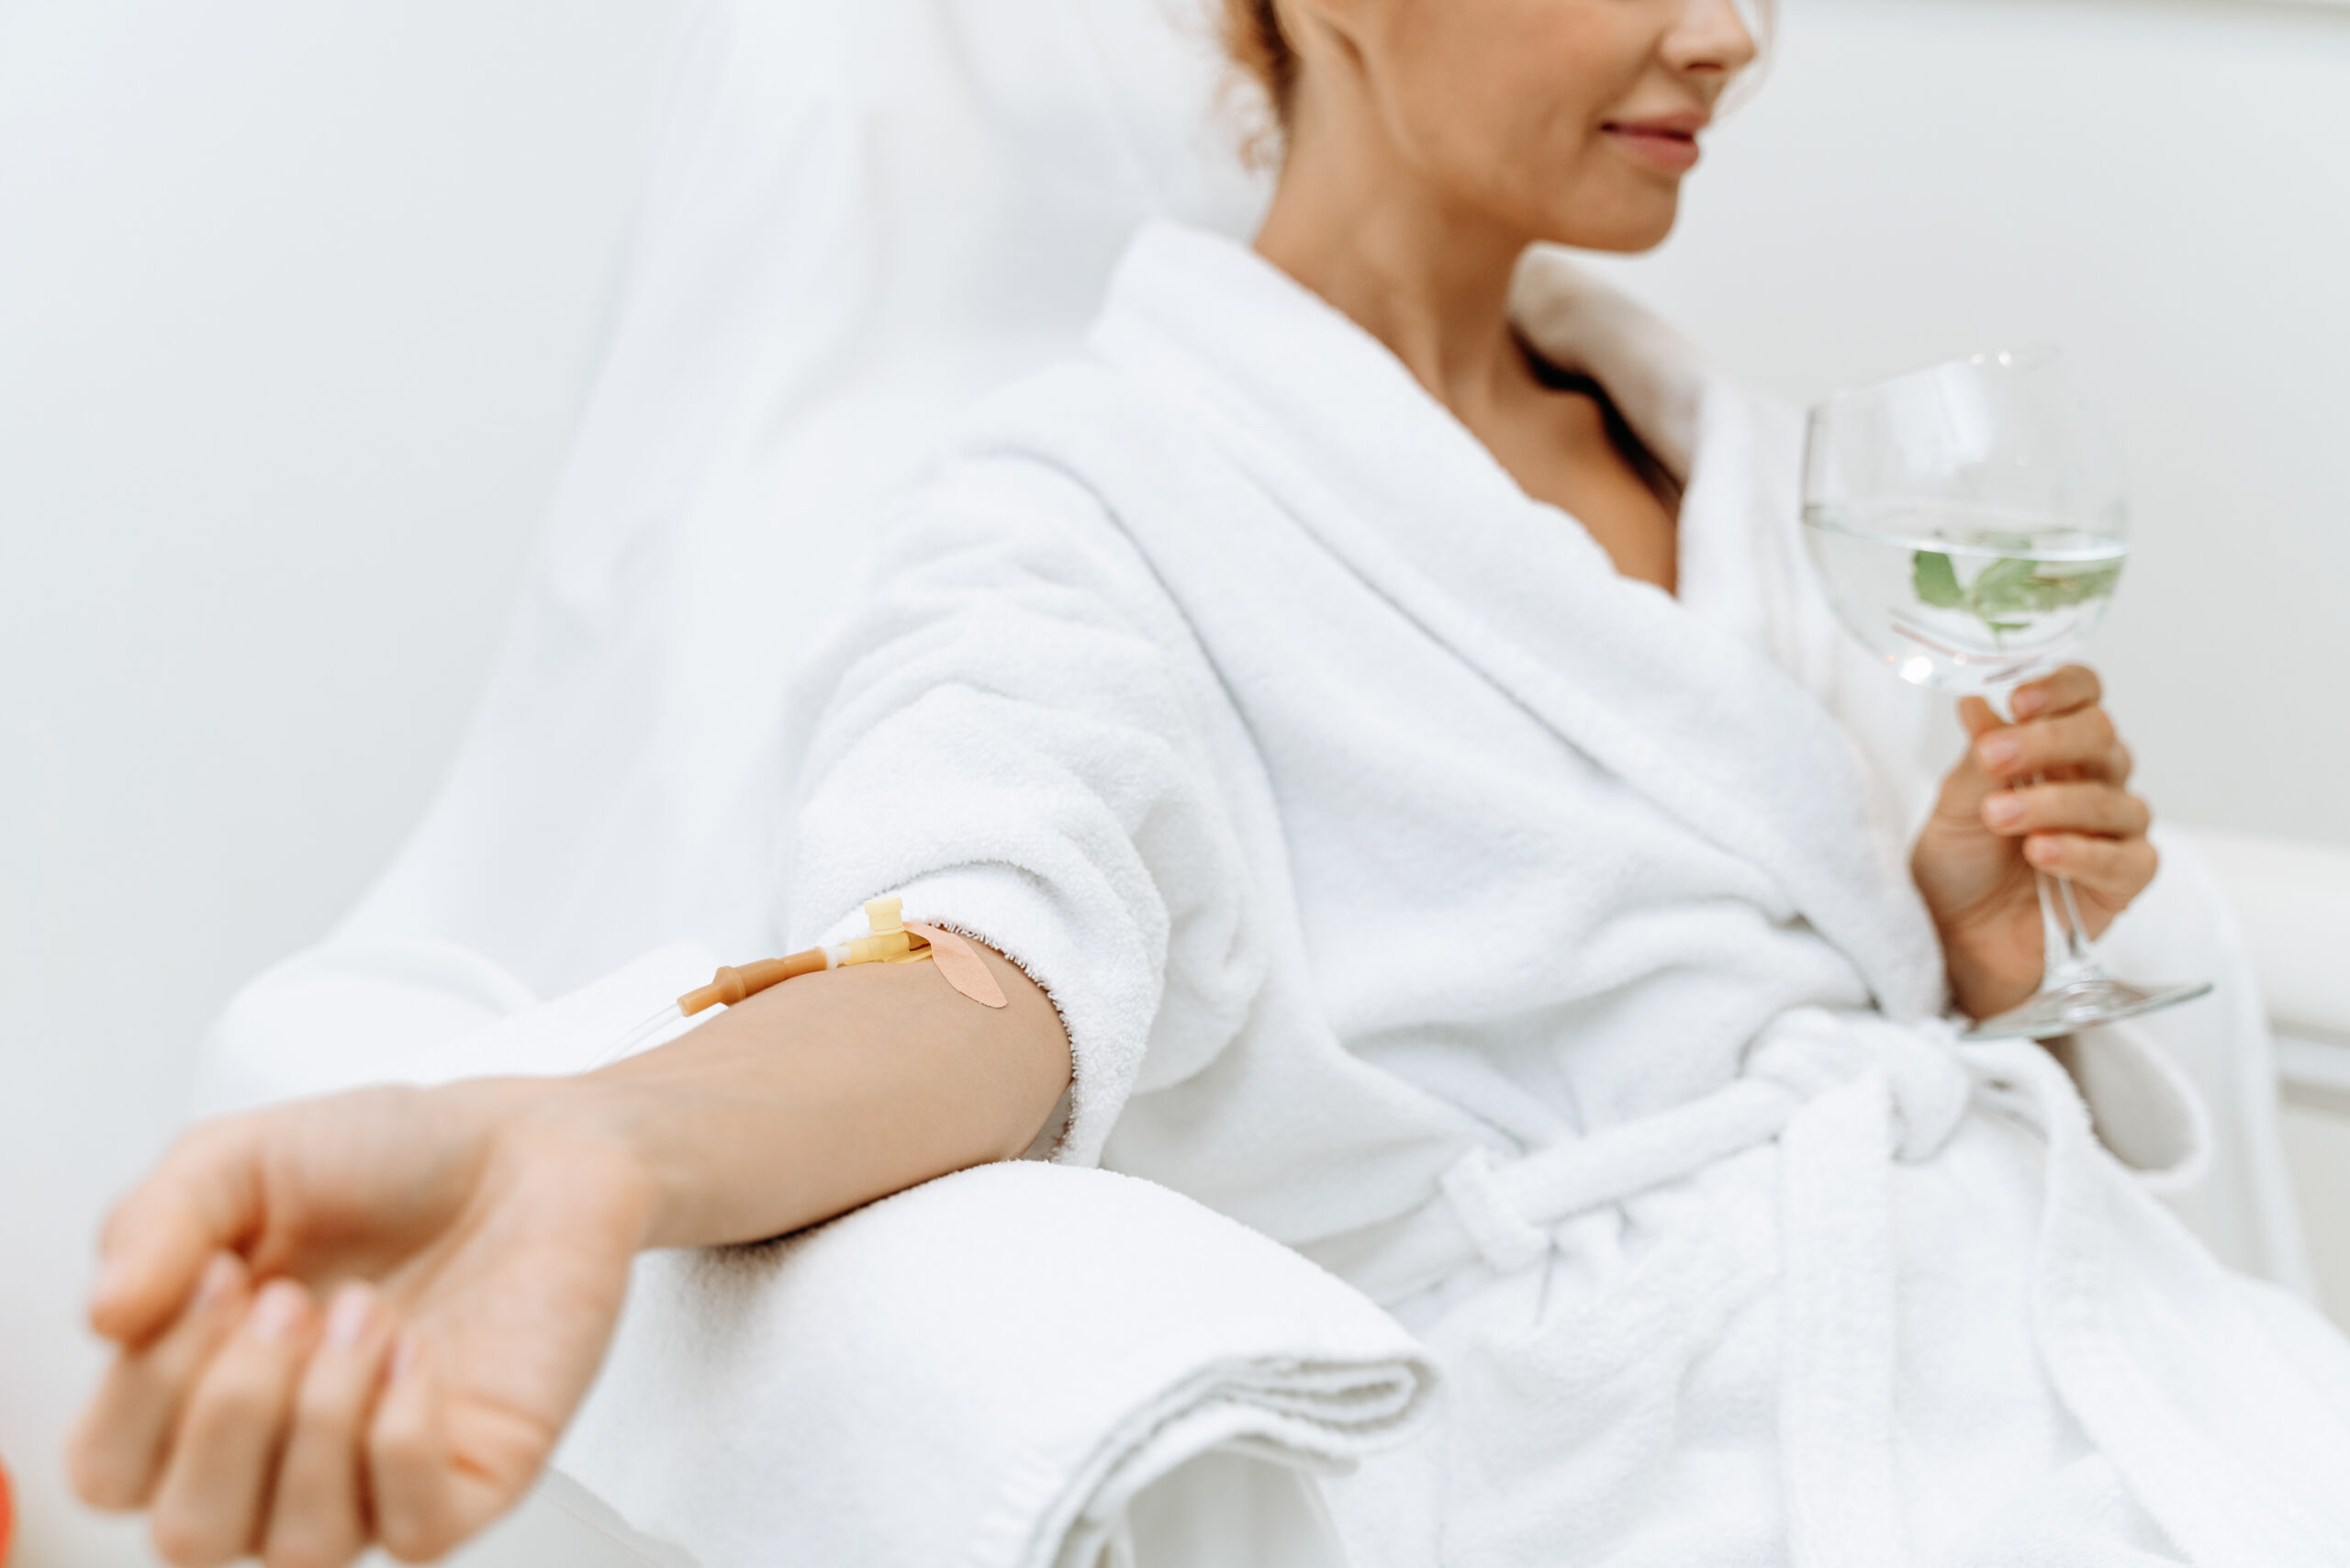 iv infusion therapy for woman